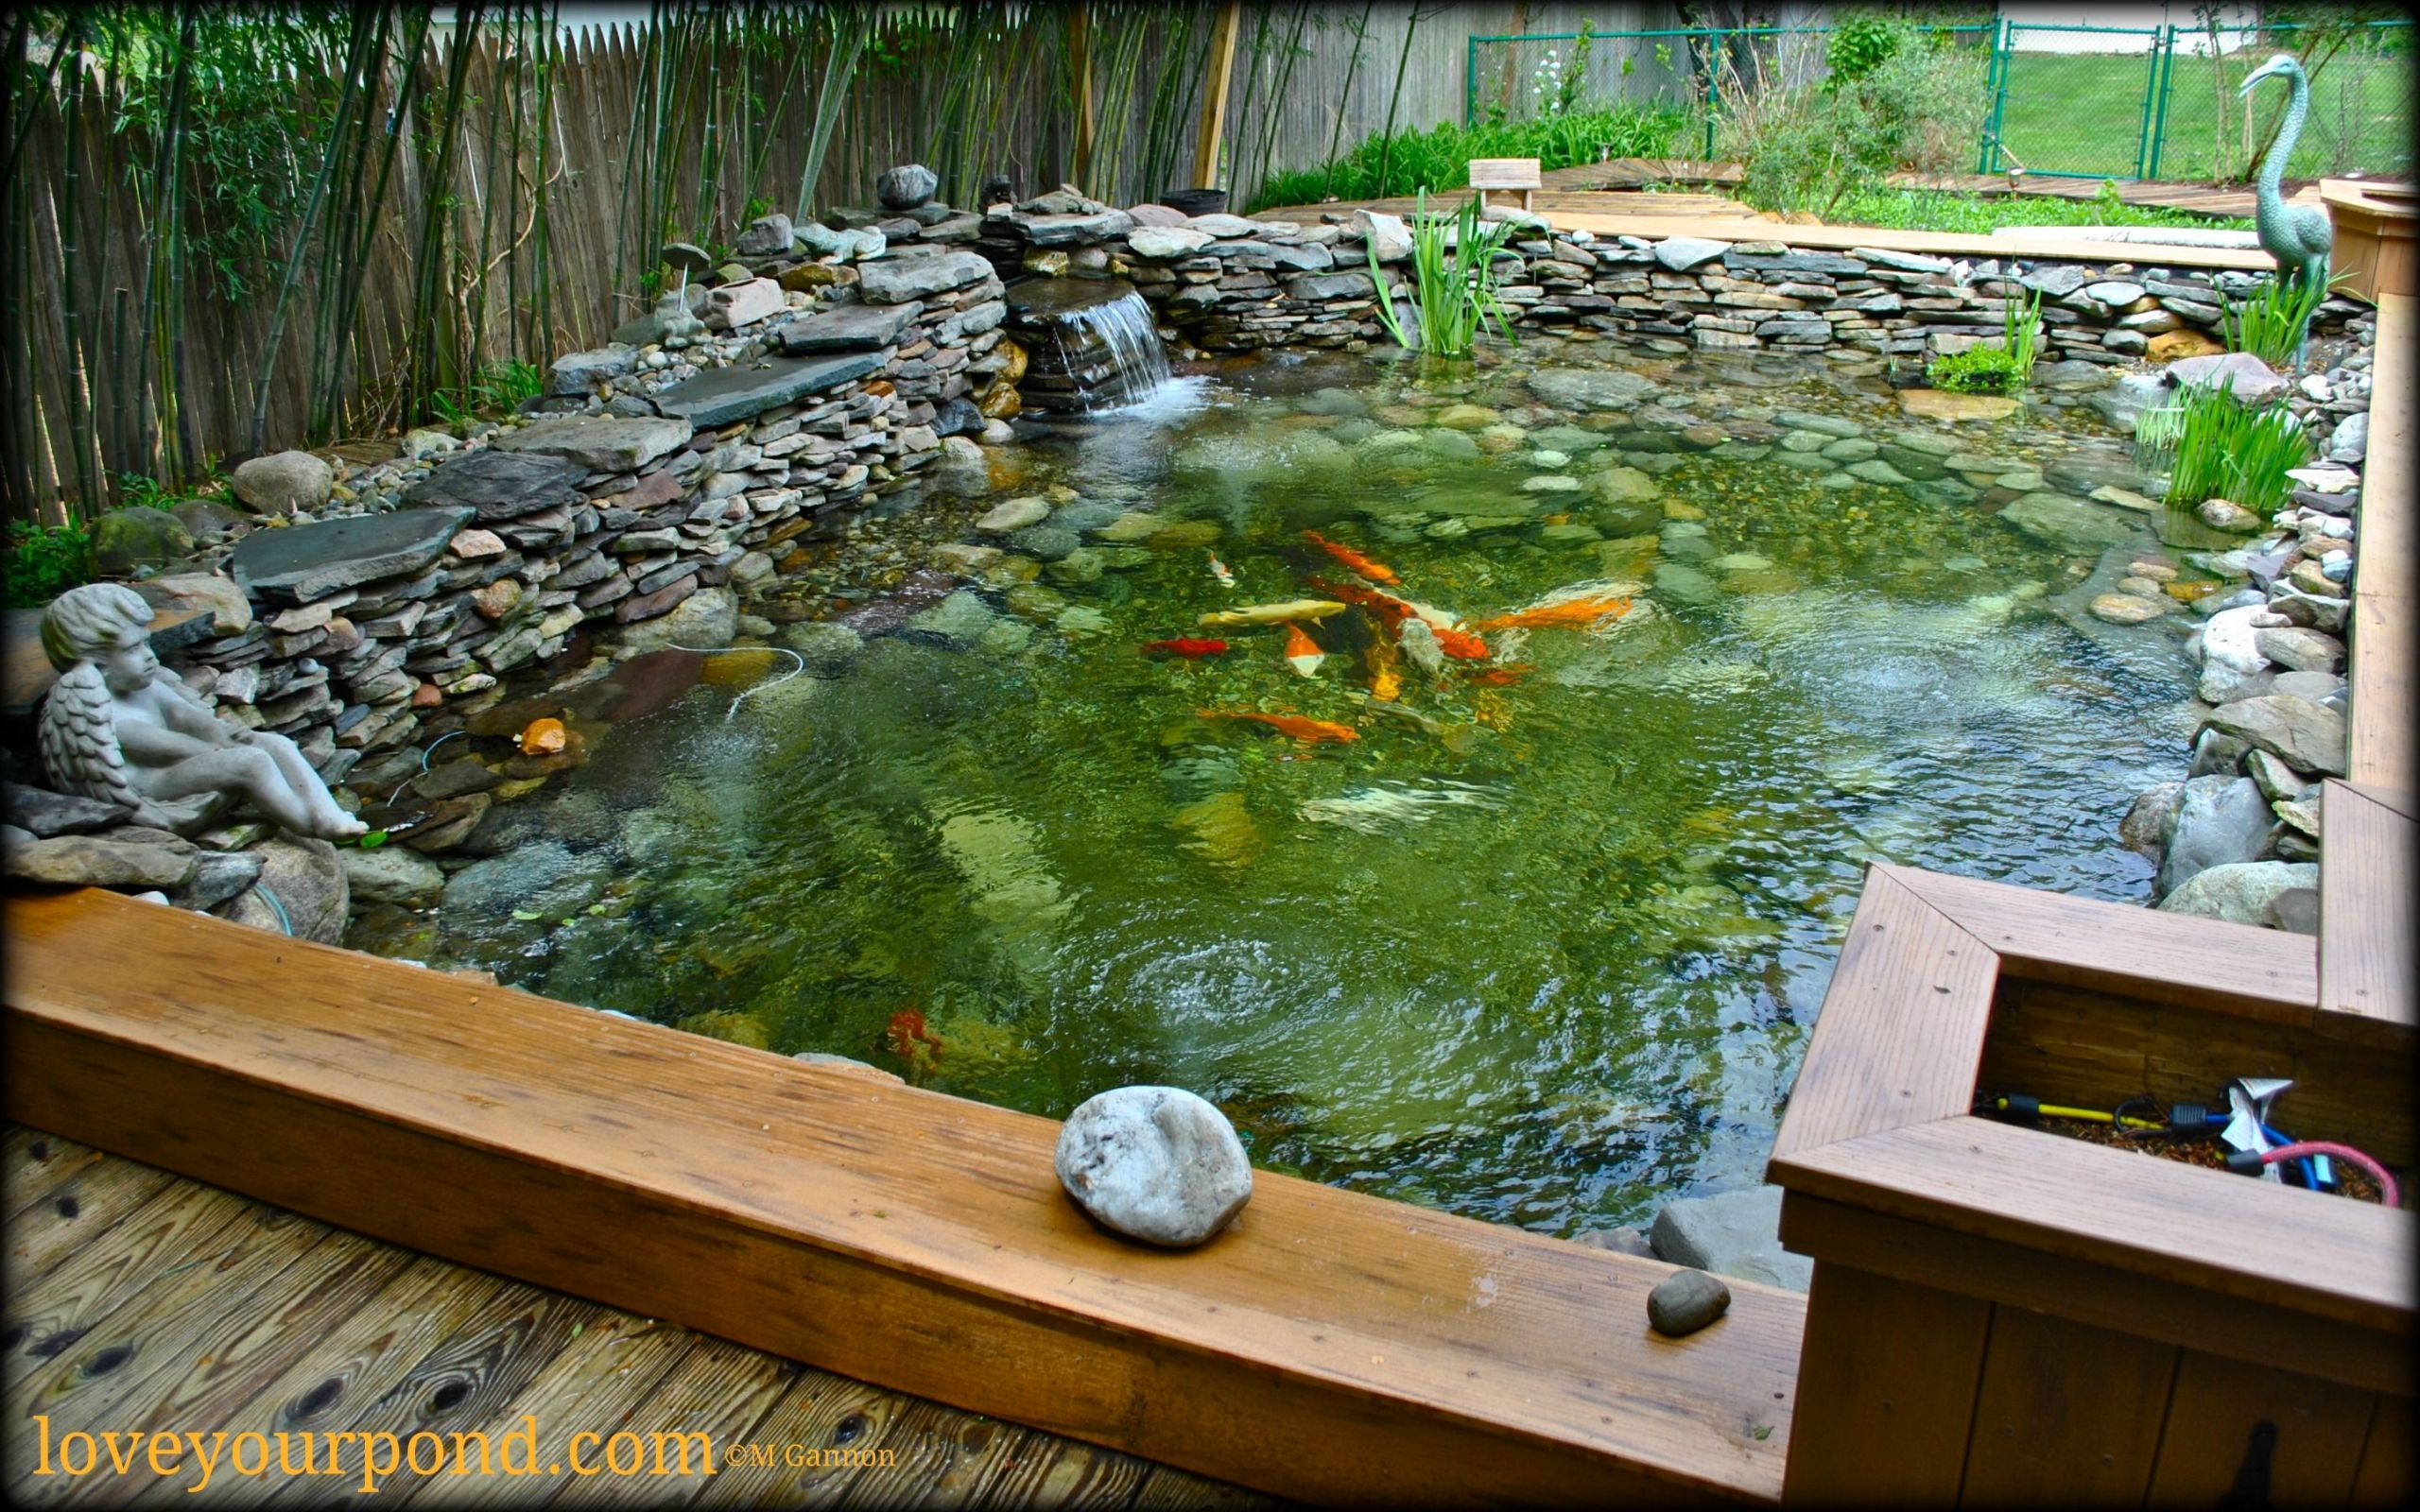 30 Incredible Above Ground Koi Pond Kits - Home, Family, Style and Art